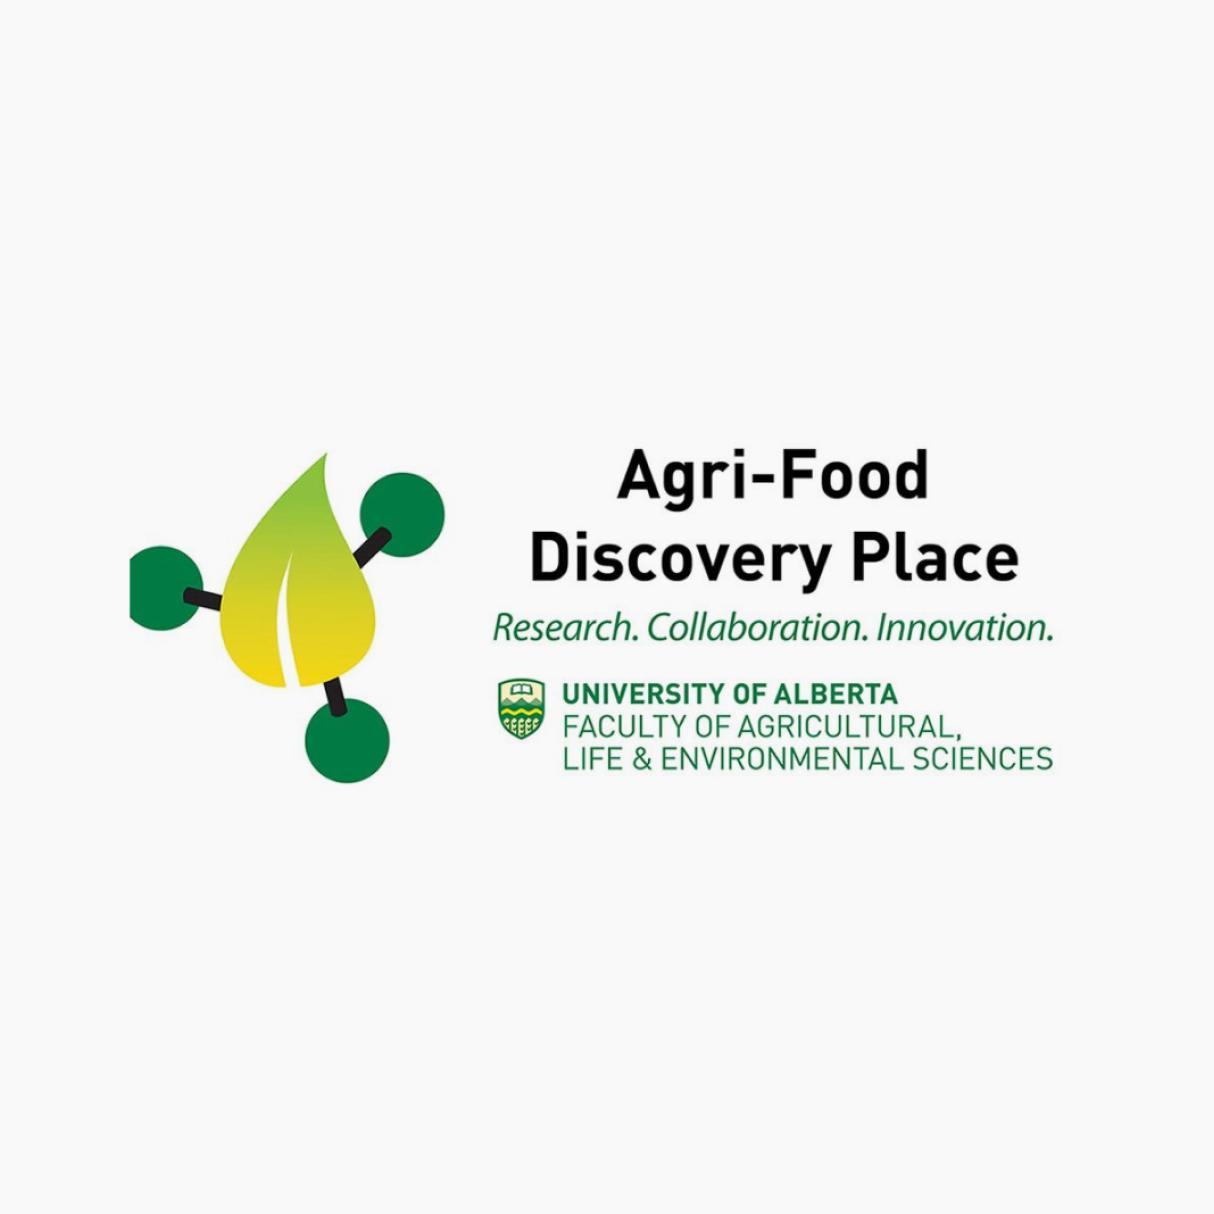 Agri-food discovery place